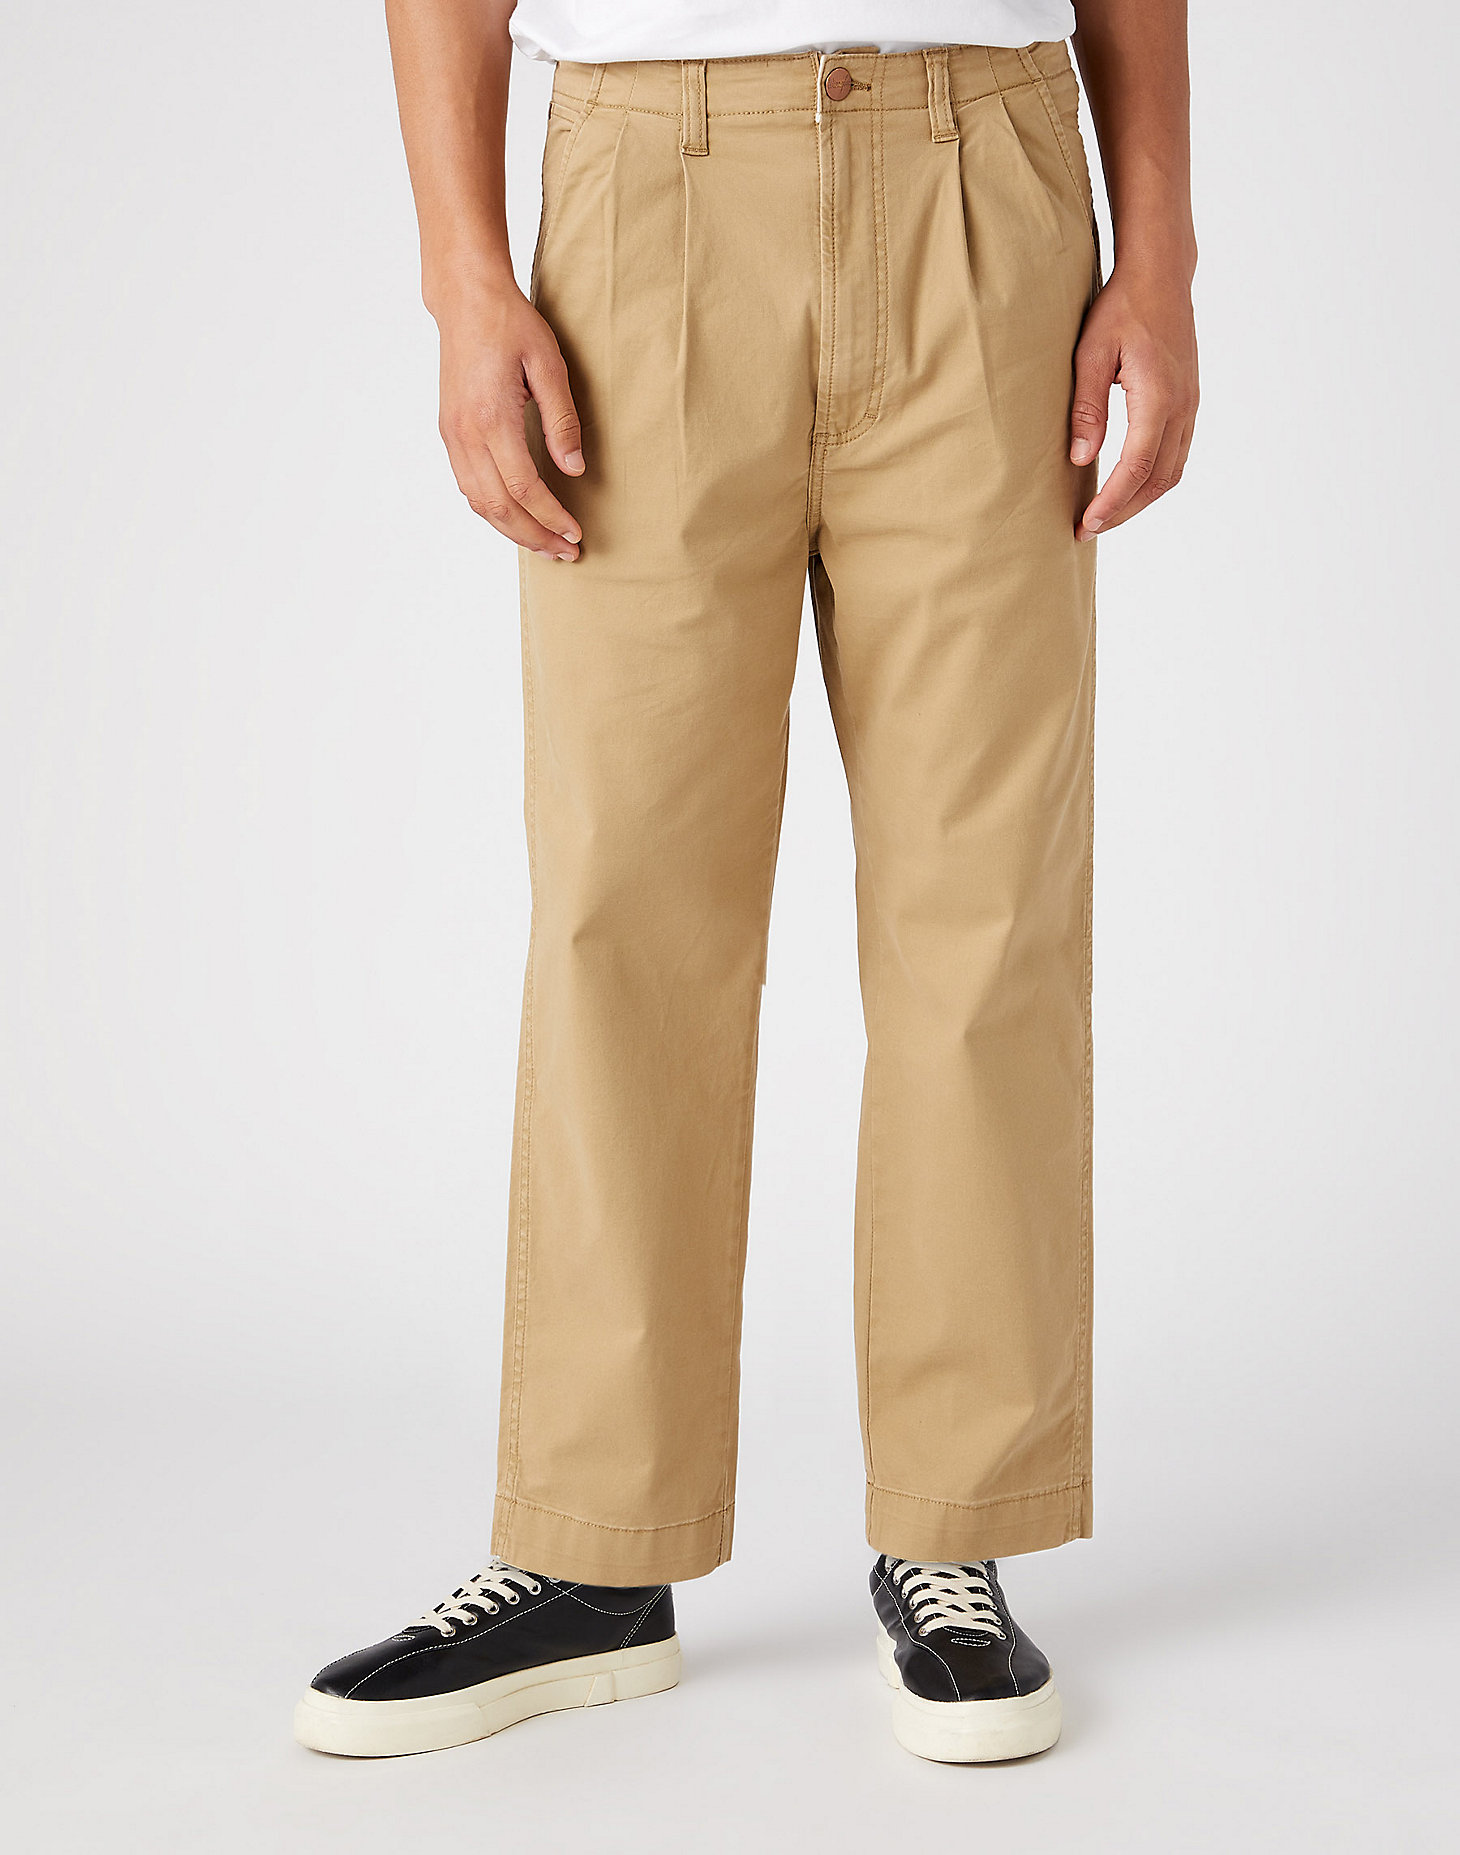 Casey Pleated Chino in Kelp main view